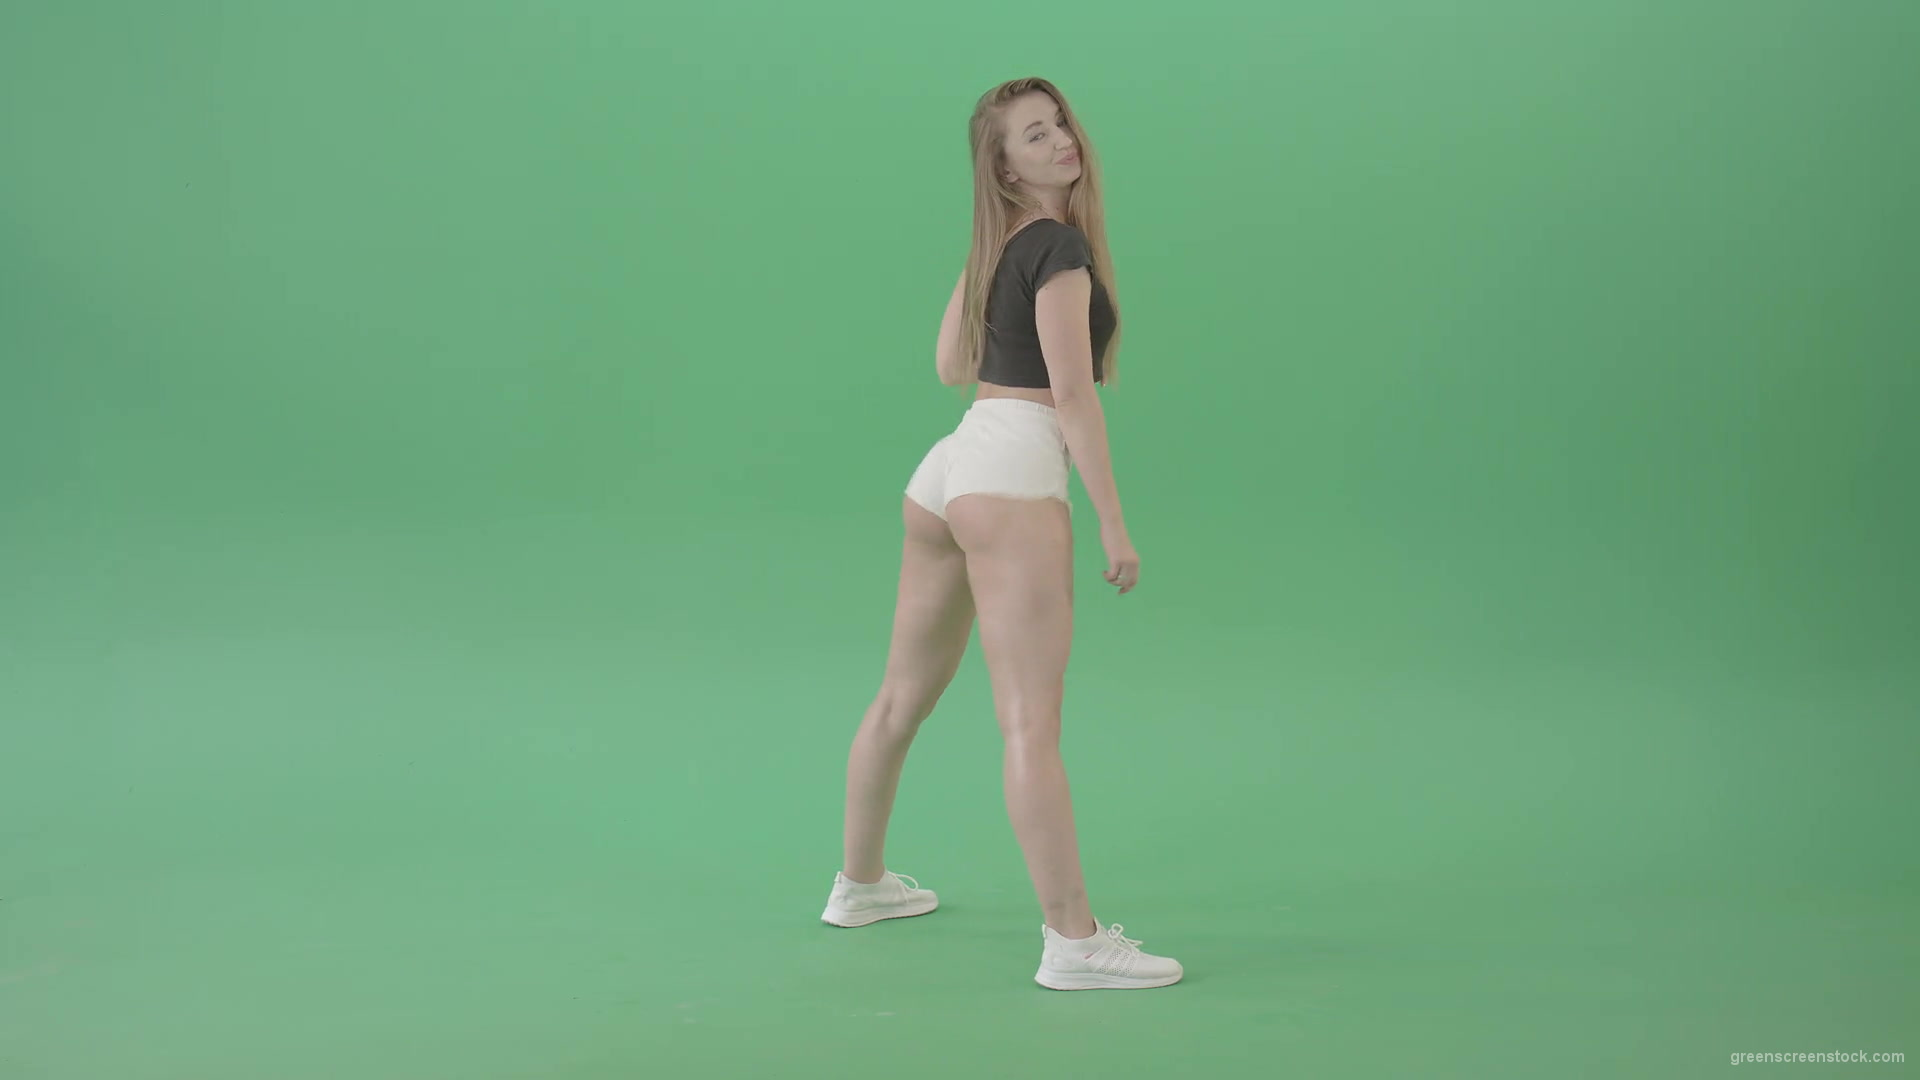 Amazing-young-woman-shaking-ass-in-side-view-twerking-dance-over-green-screen-4K-Video-Footage-1920_002 Green Screen Stock